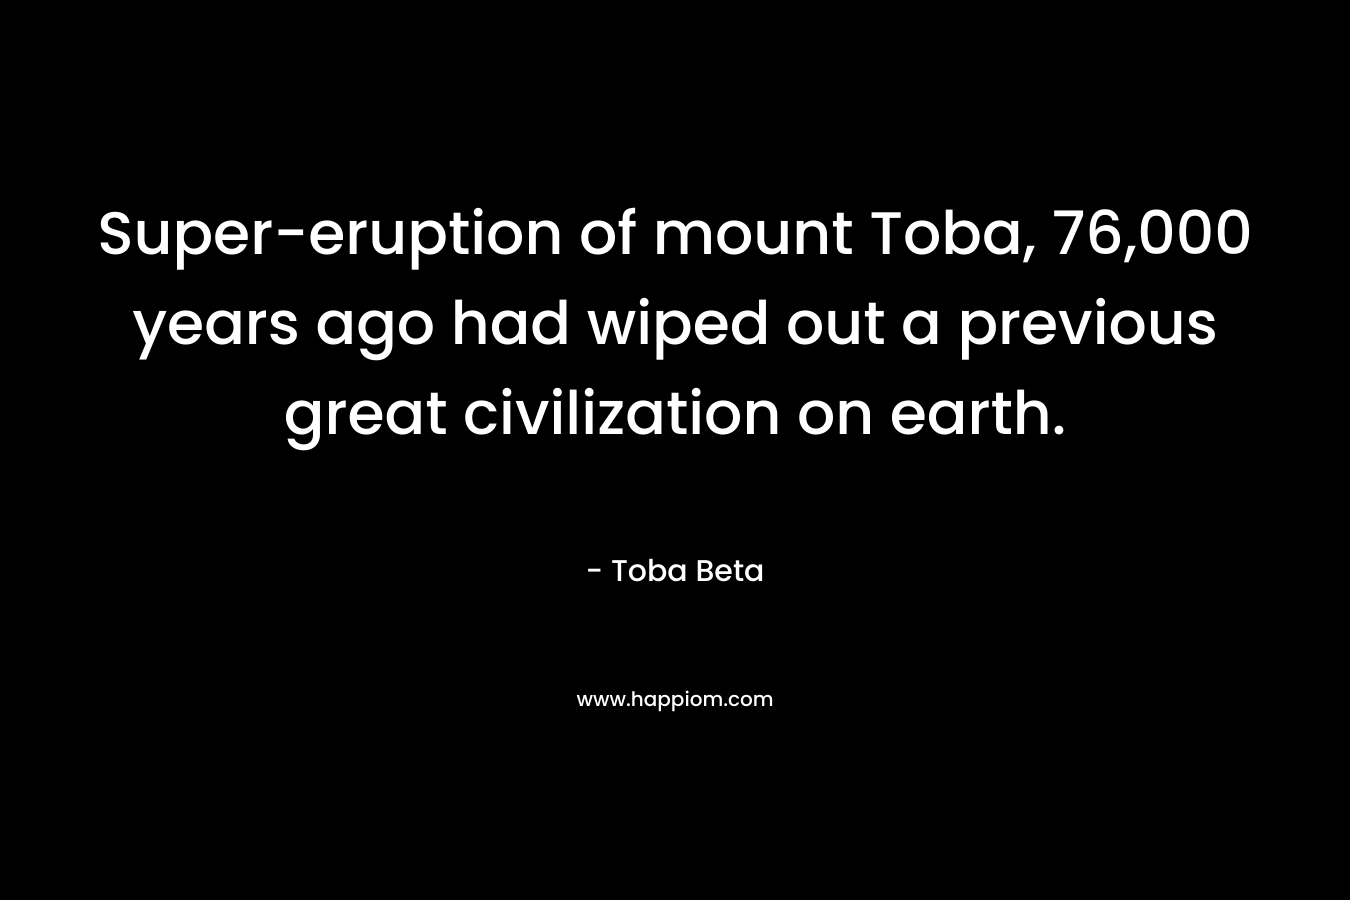 Super-eruption of mount Toba, 76,000 years ago had wiped out a previous great civilization on earth. – Toba Beta